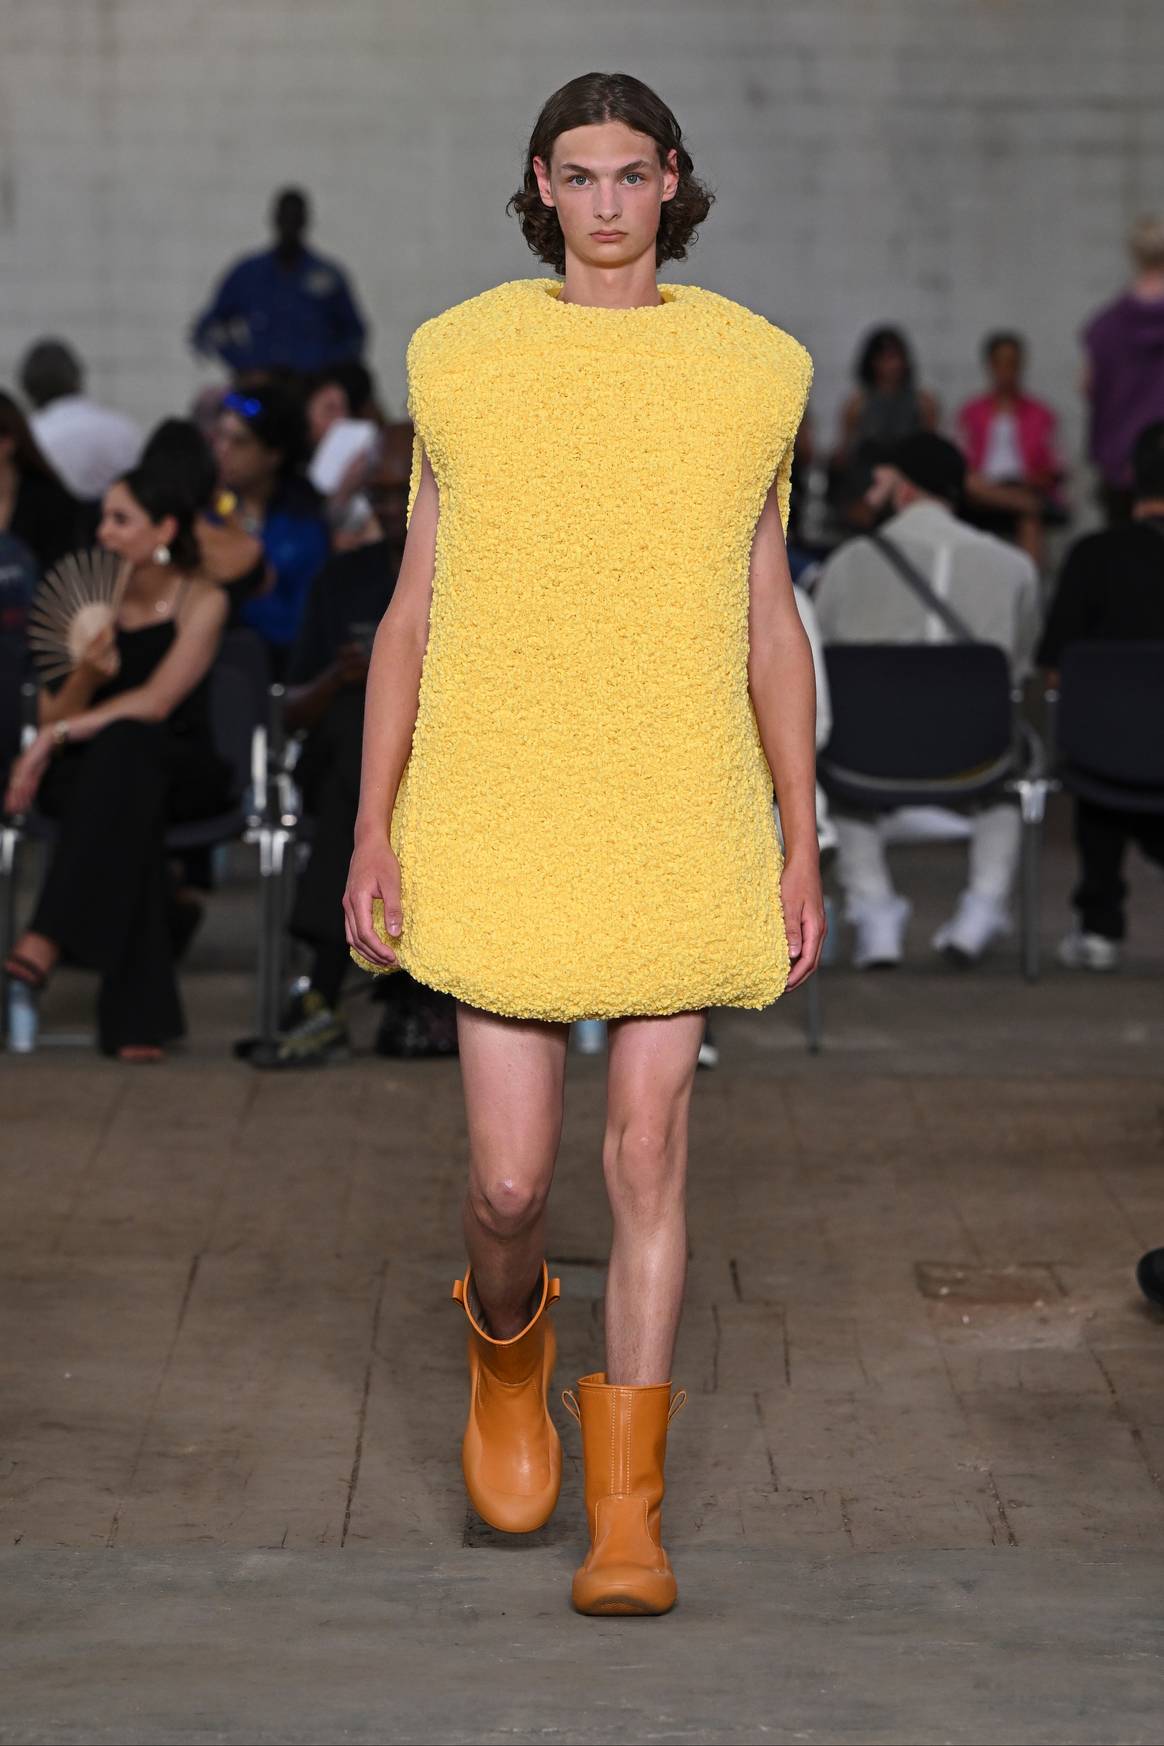 JW Anderson, Men and Women SS23 Collection, courtesy of the brand